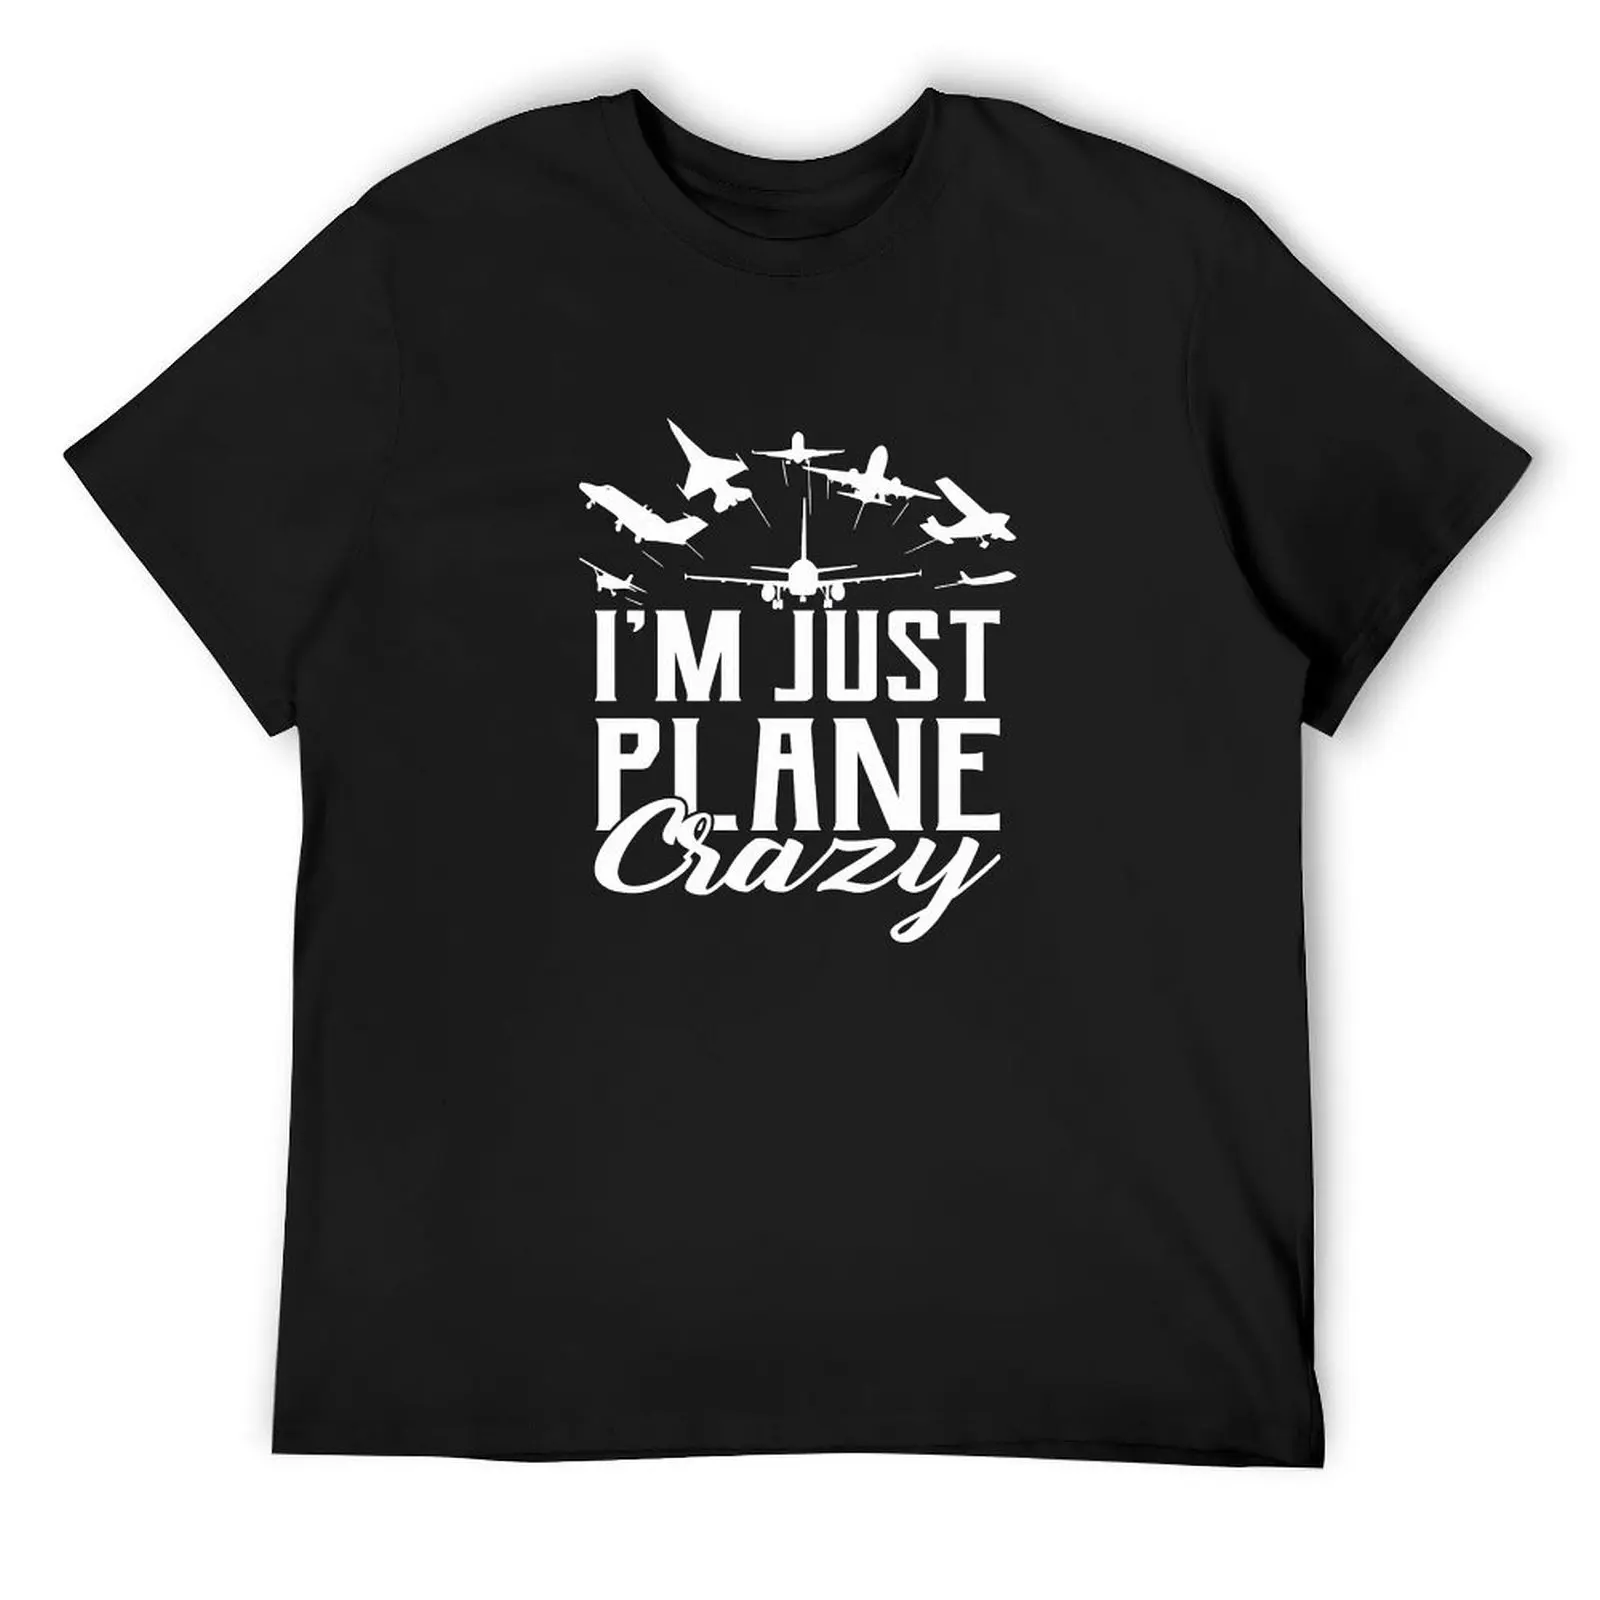 

I Am Just Plane Crazy T-Shirt Awesome T-Shirts O Neck Hippie Tee Shirt Summer Male Design Tees Plus Size 4XL 5XL